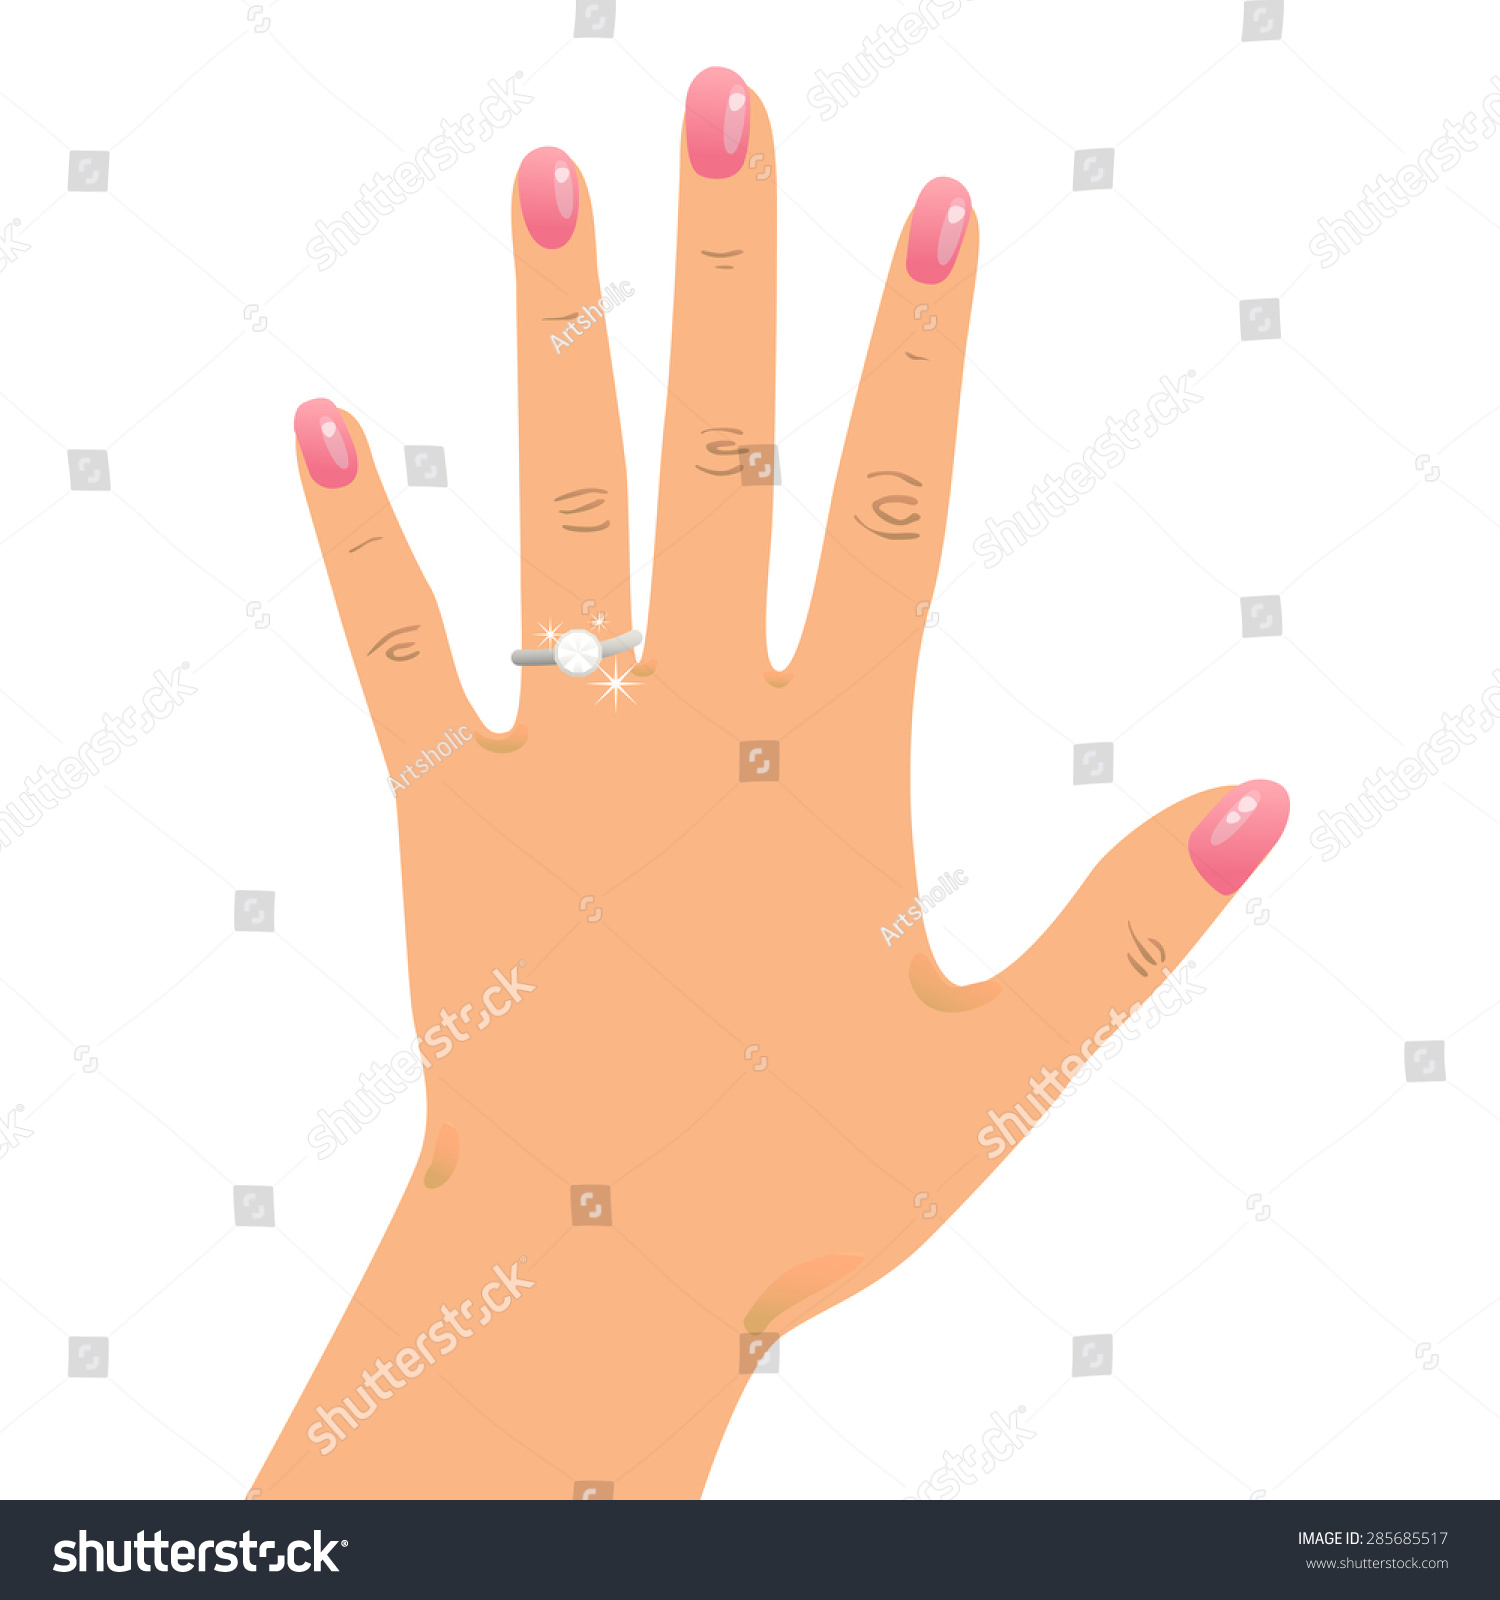 SVG of Hand wearing engagement ring and wedding ring. svg